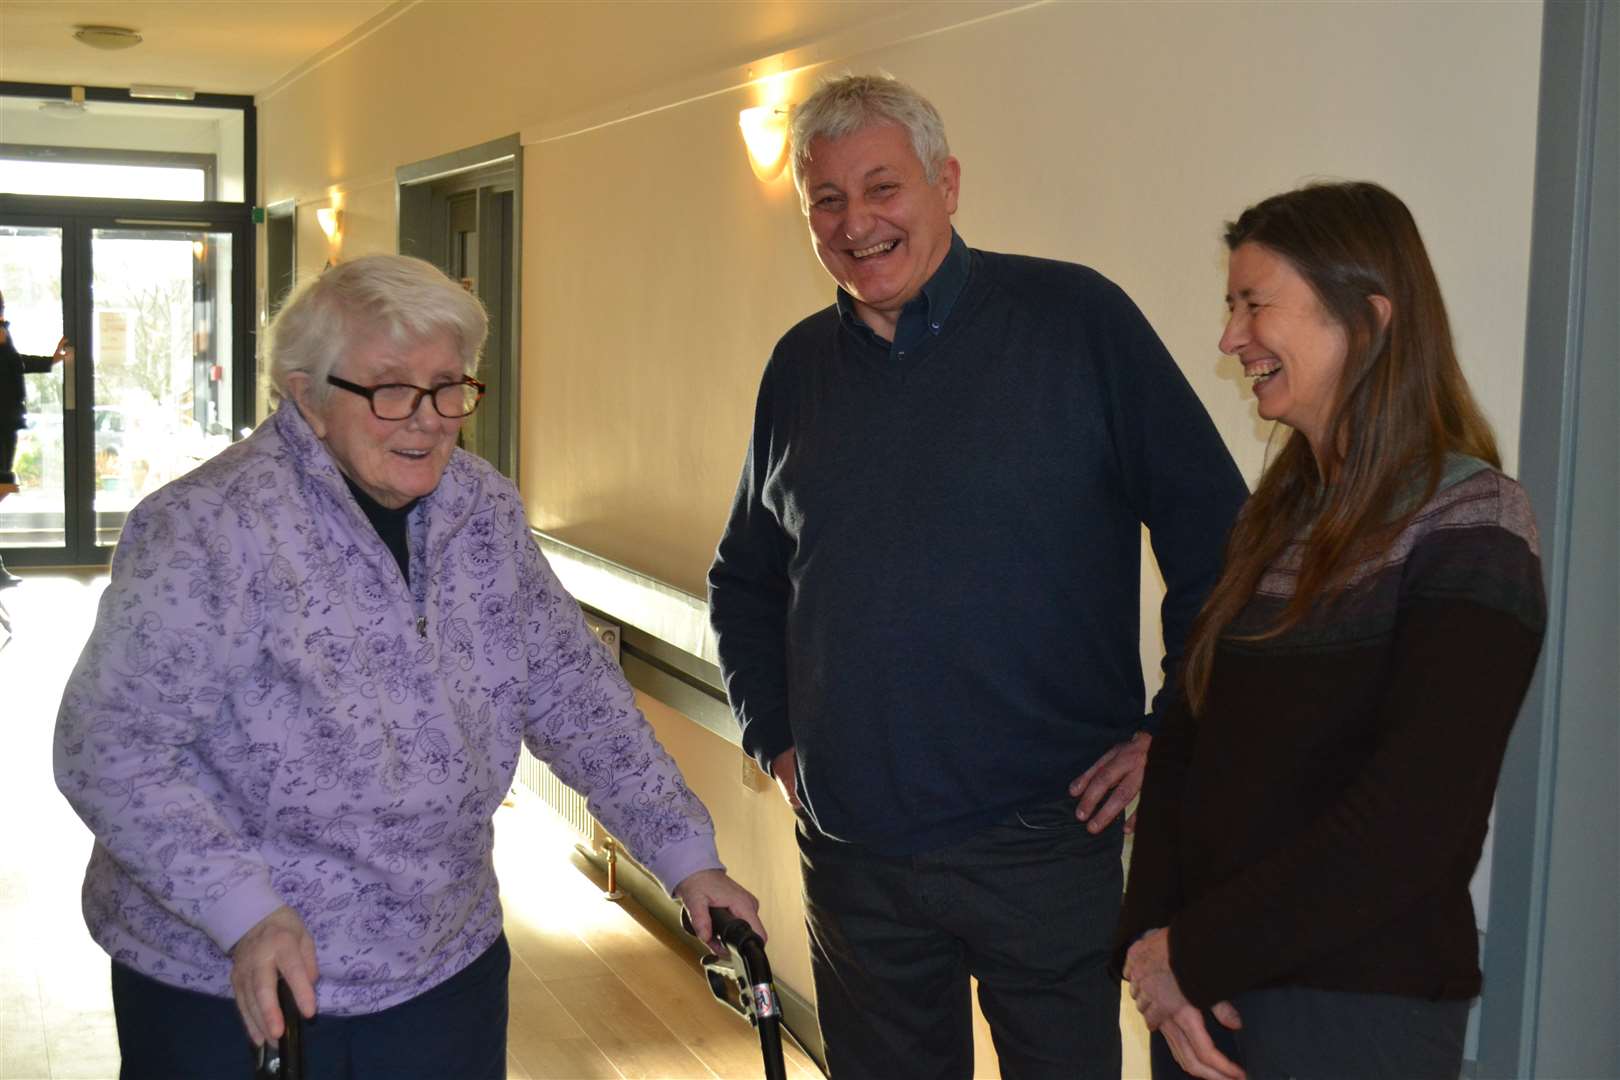 MSP John Finnie and Ariane Burgess stopped to talk to Mary Morrison, Lairg, during their tour of the Bradbury Centre.